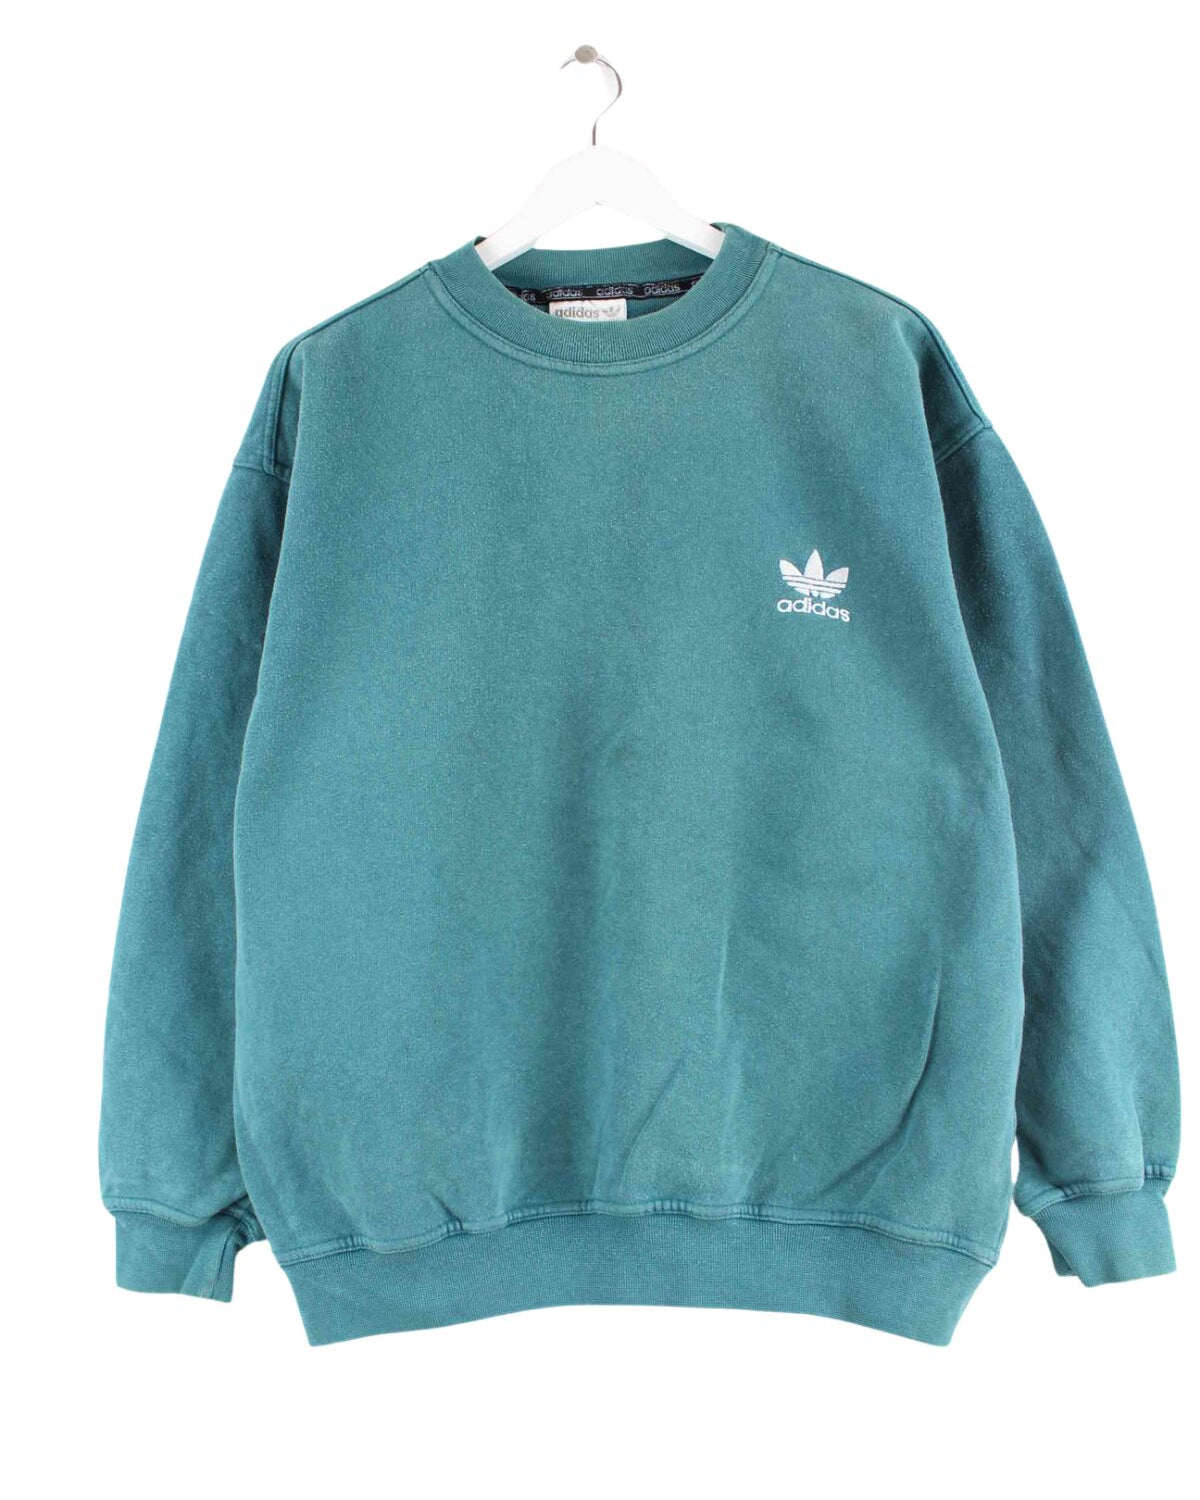 Adidas 80s Vintage Trefoil Embroidered Sweater Grün S (front image)